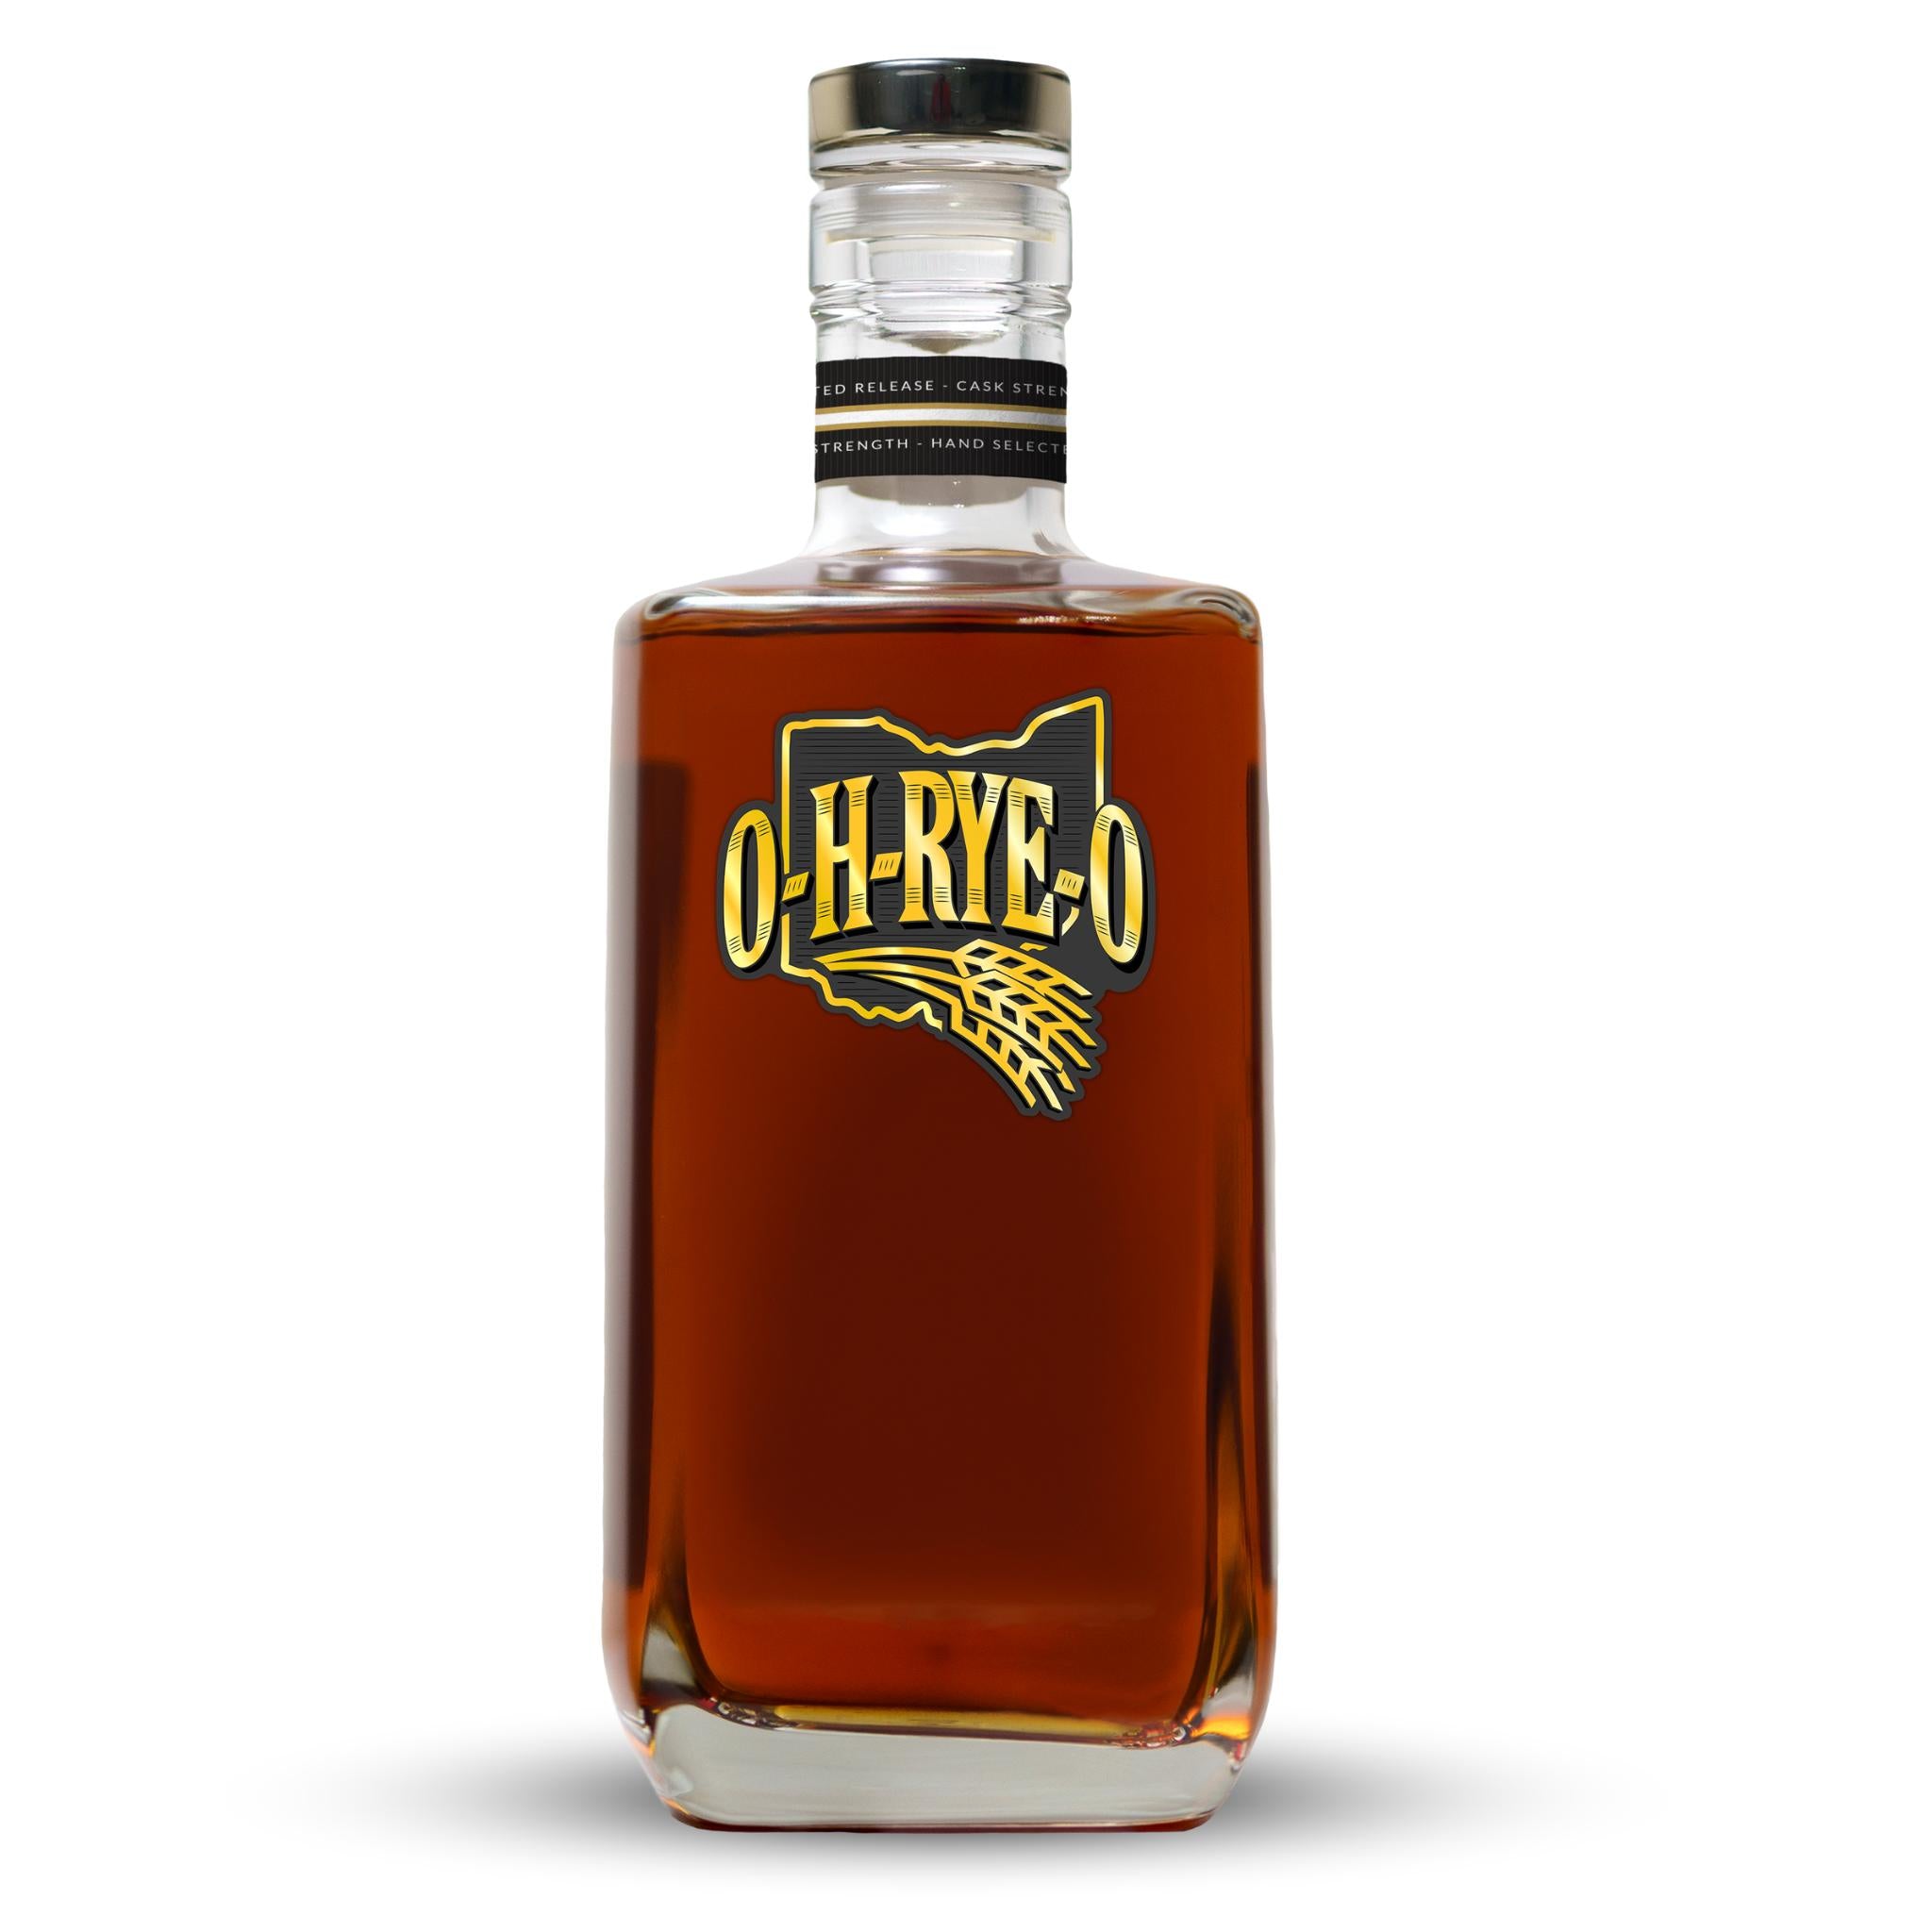 5-Year Ohio Double Barreled Pumpernickel Rye Whiskey Featuring Middle West Spirits